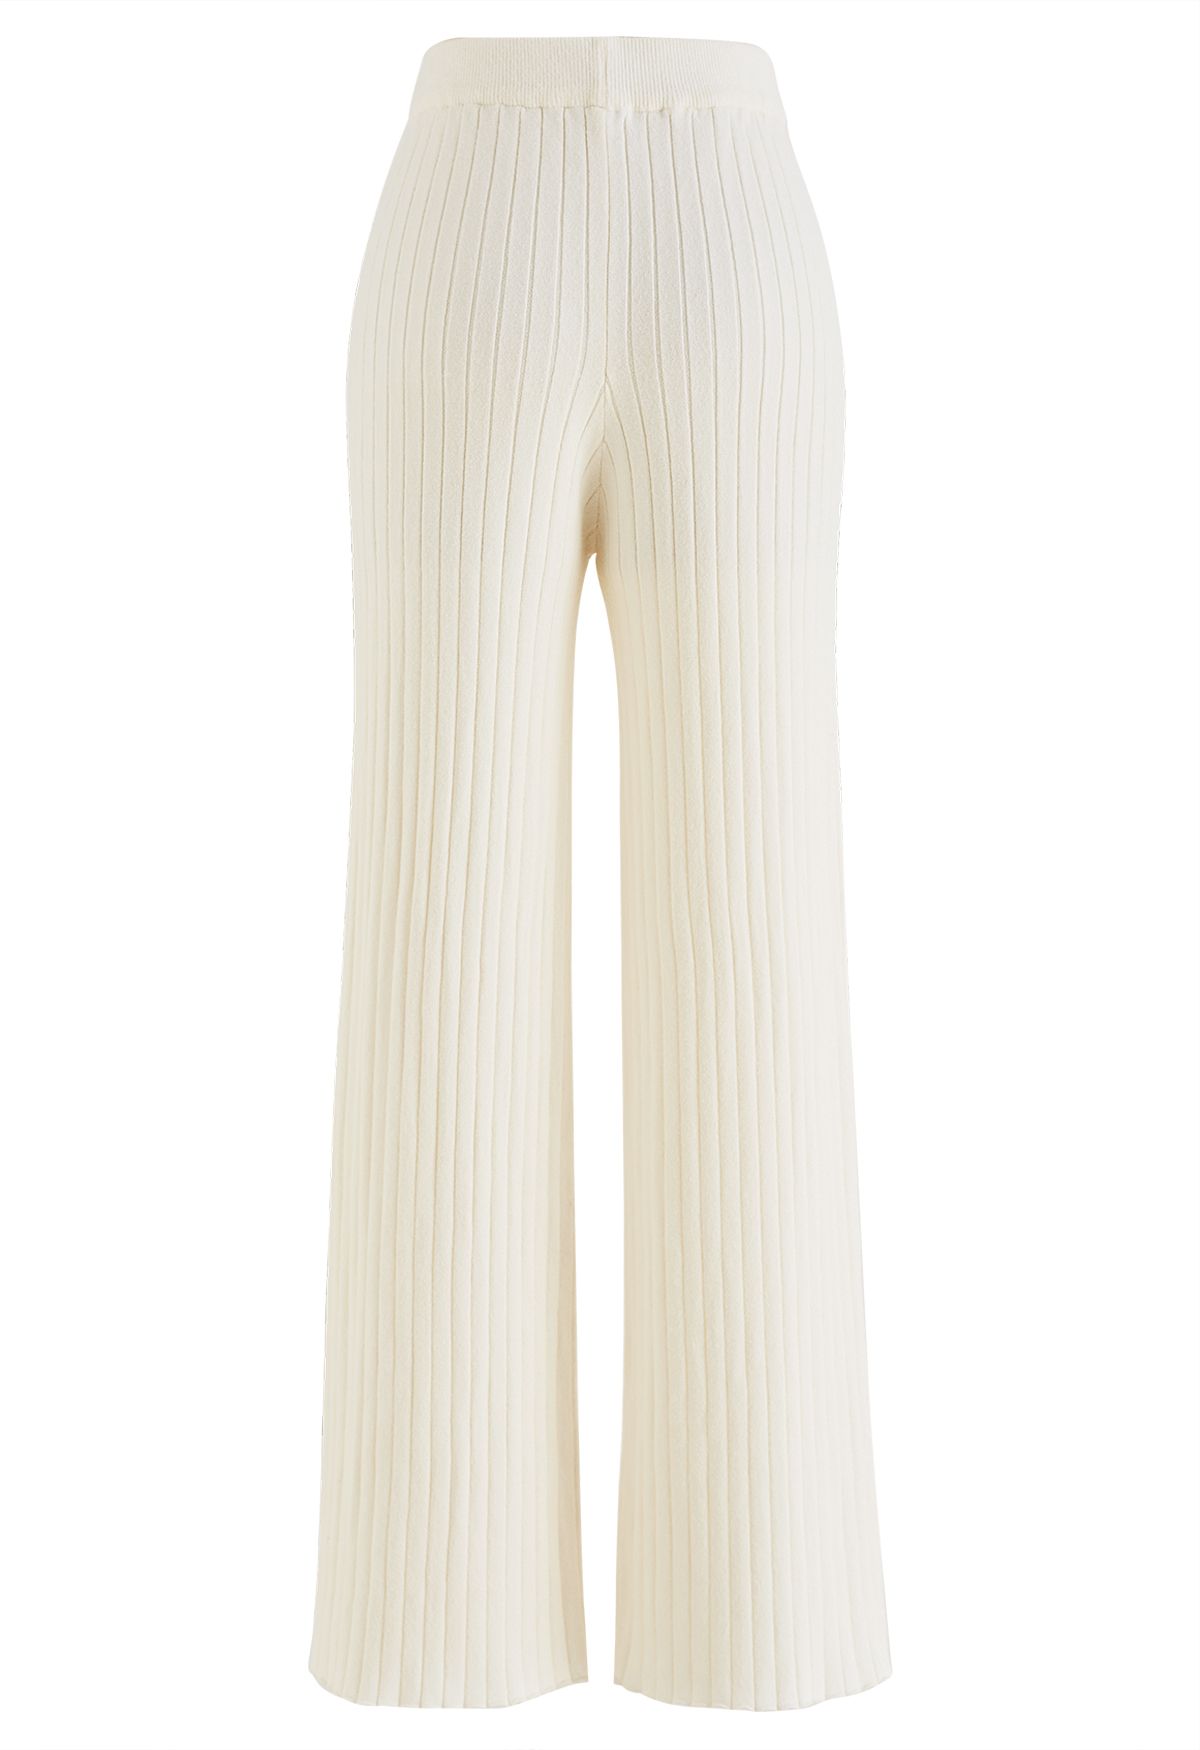 Ribbed Straight Leg Knit Pants in Cream